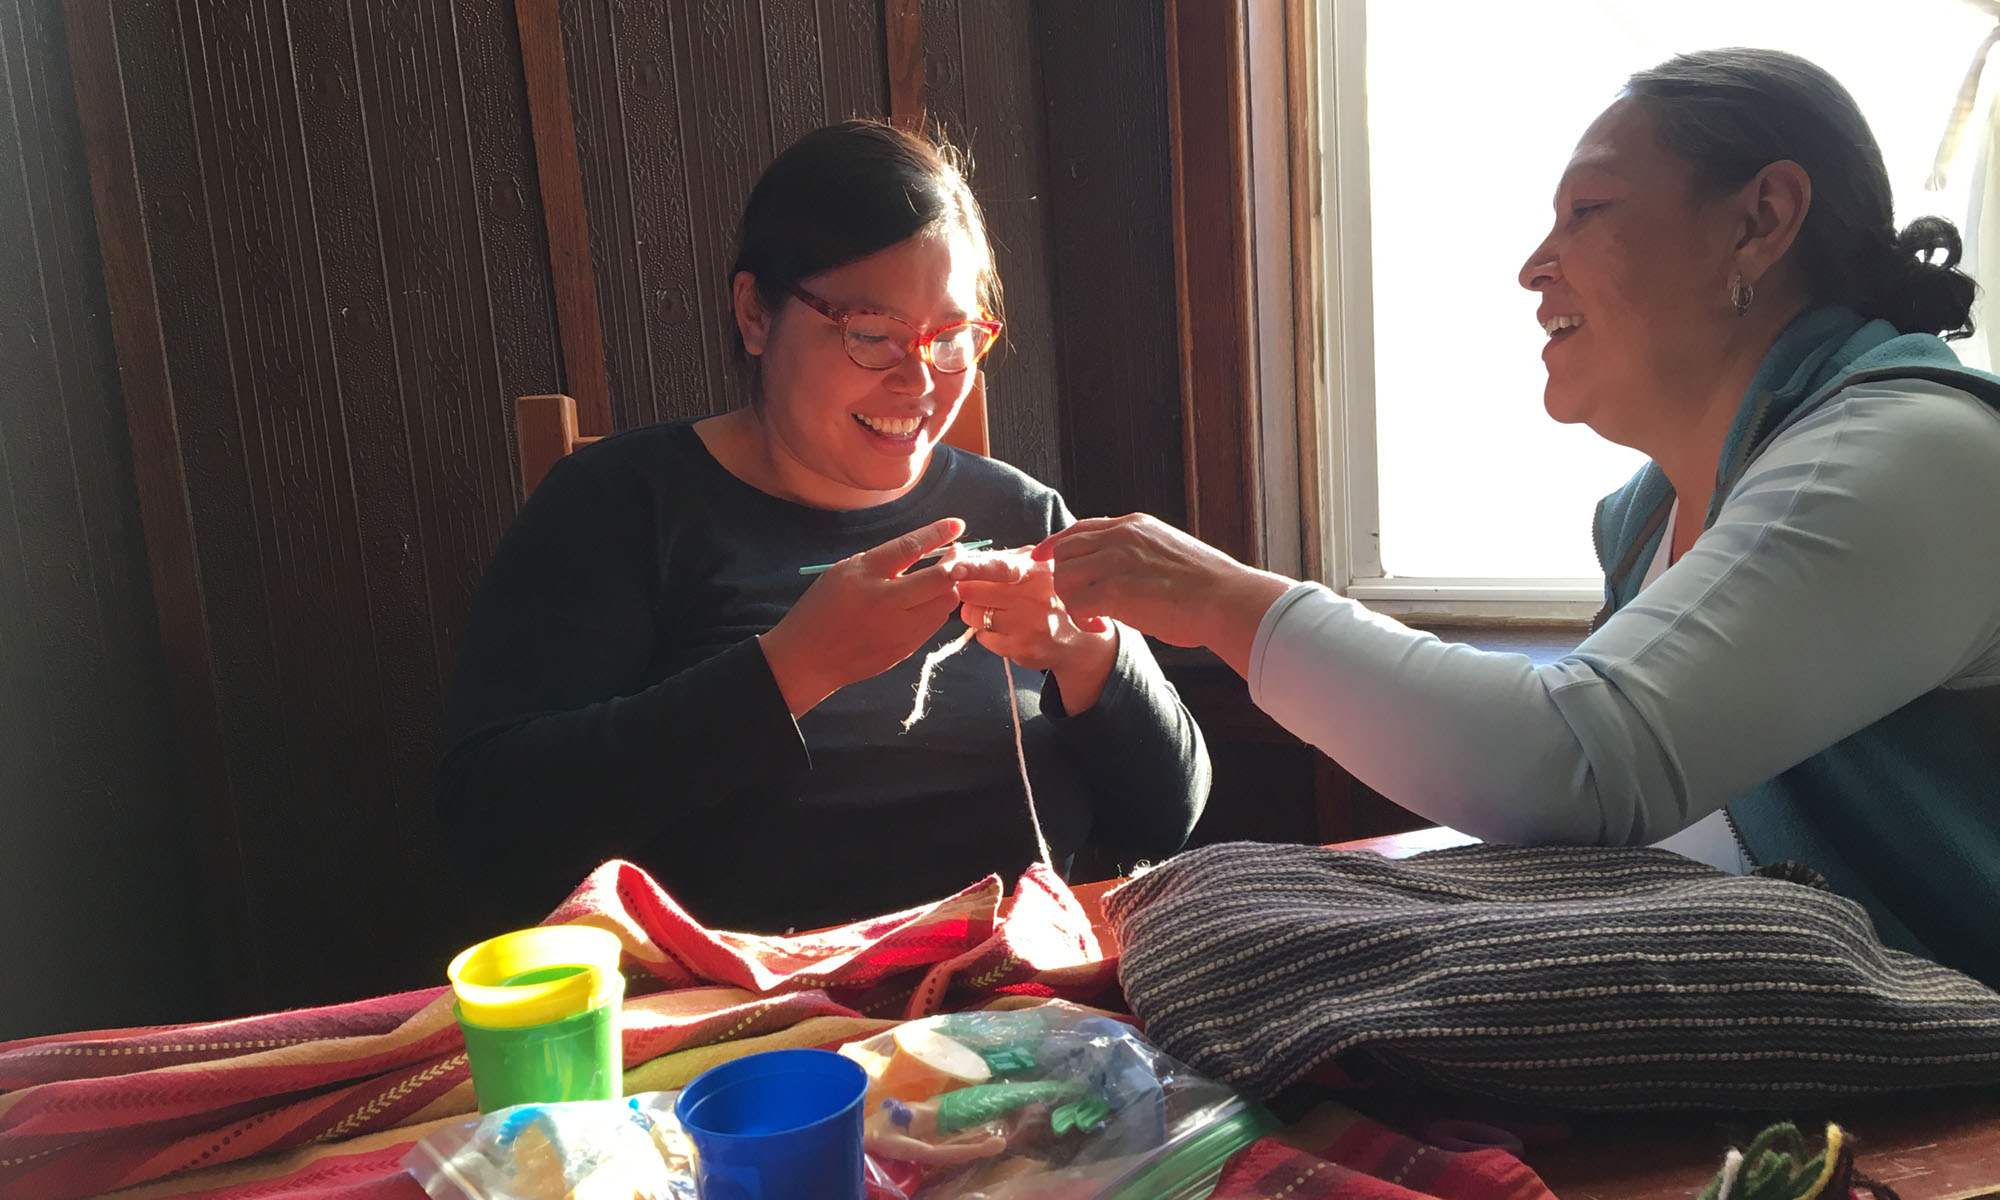 Rosa and her Mami sit at a table crocheting.